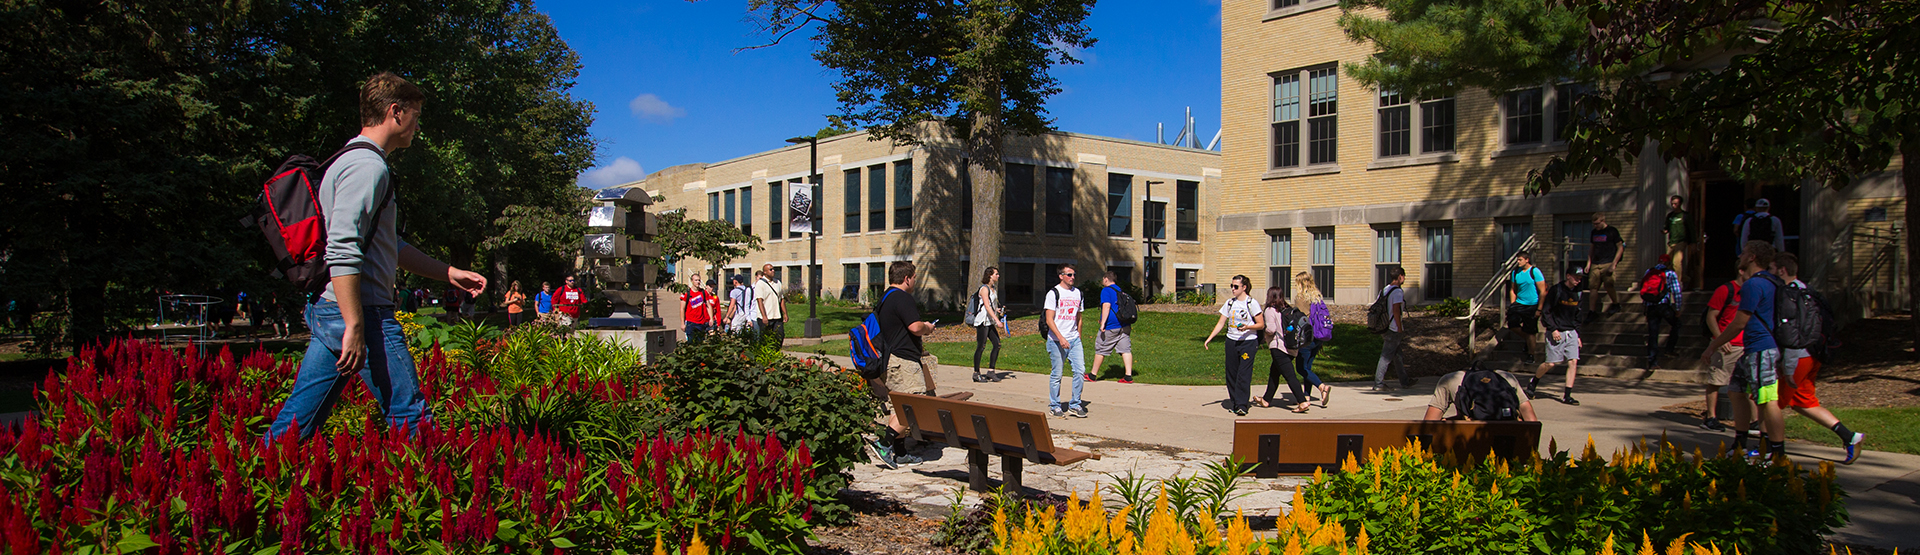 Students walking across campus in fall